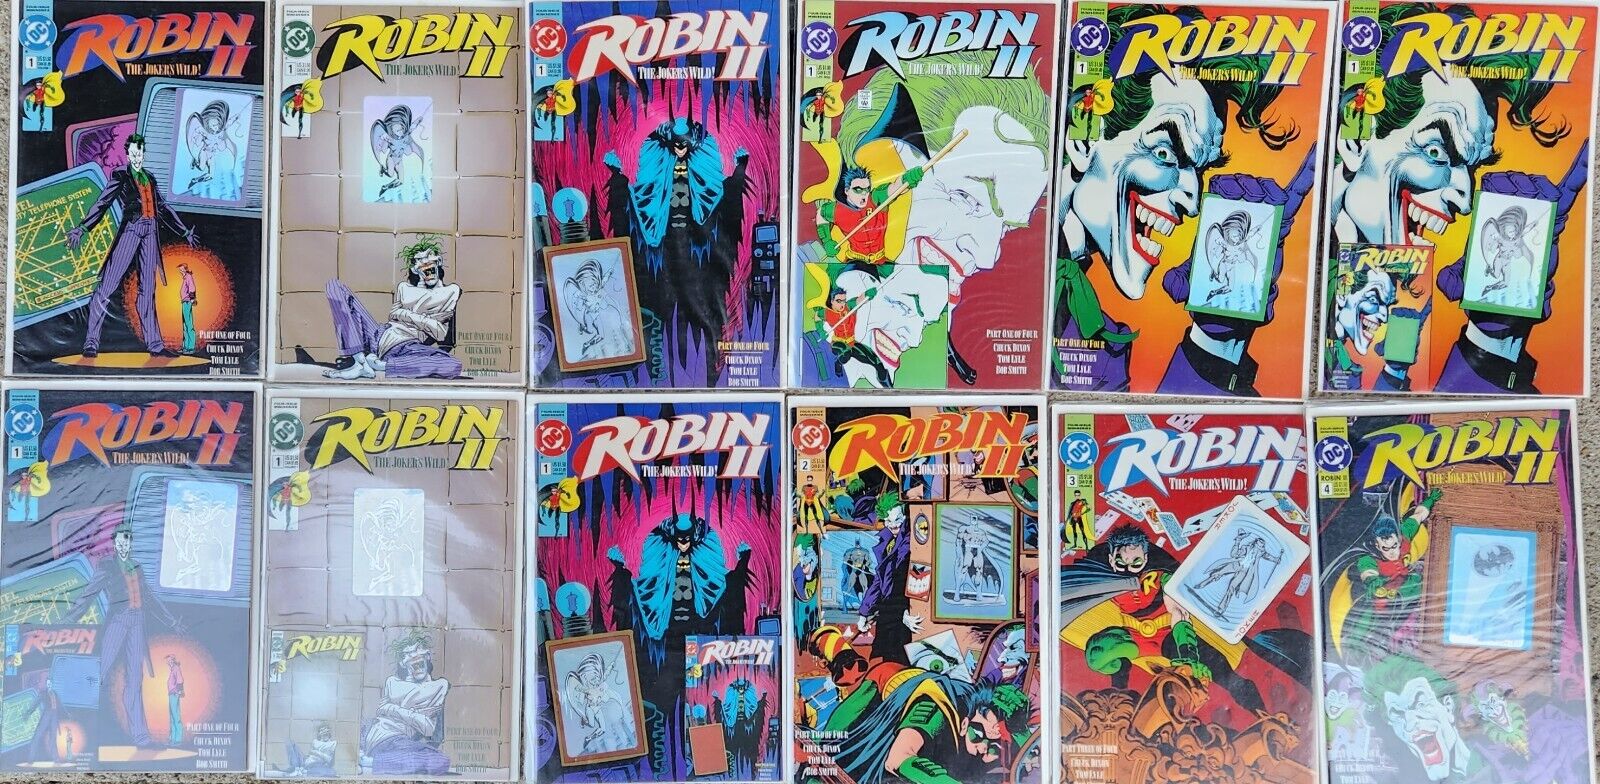 Robin II The Jokers Wild 1-4 (9 #1s)  Submit Offers